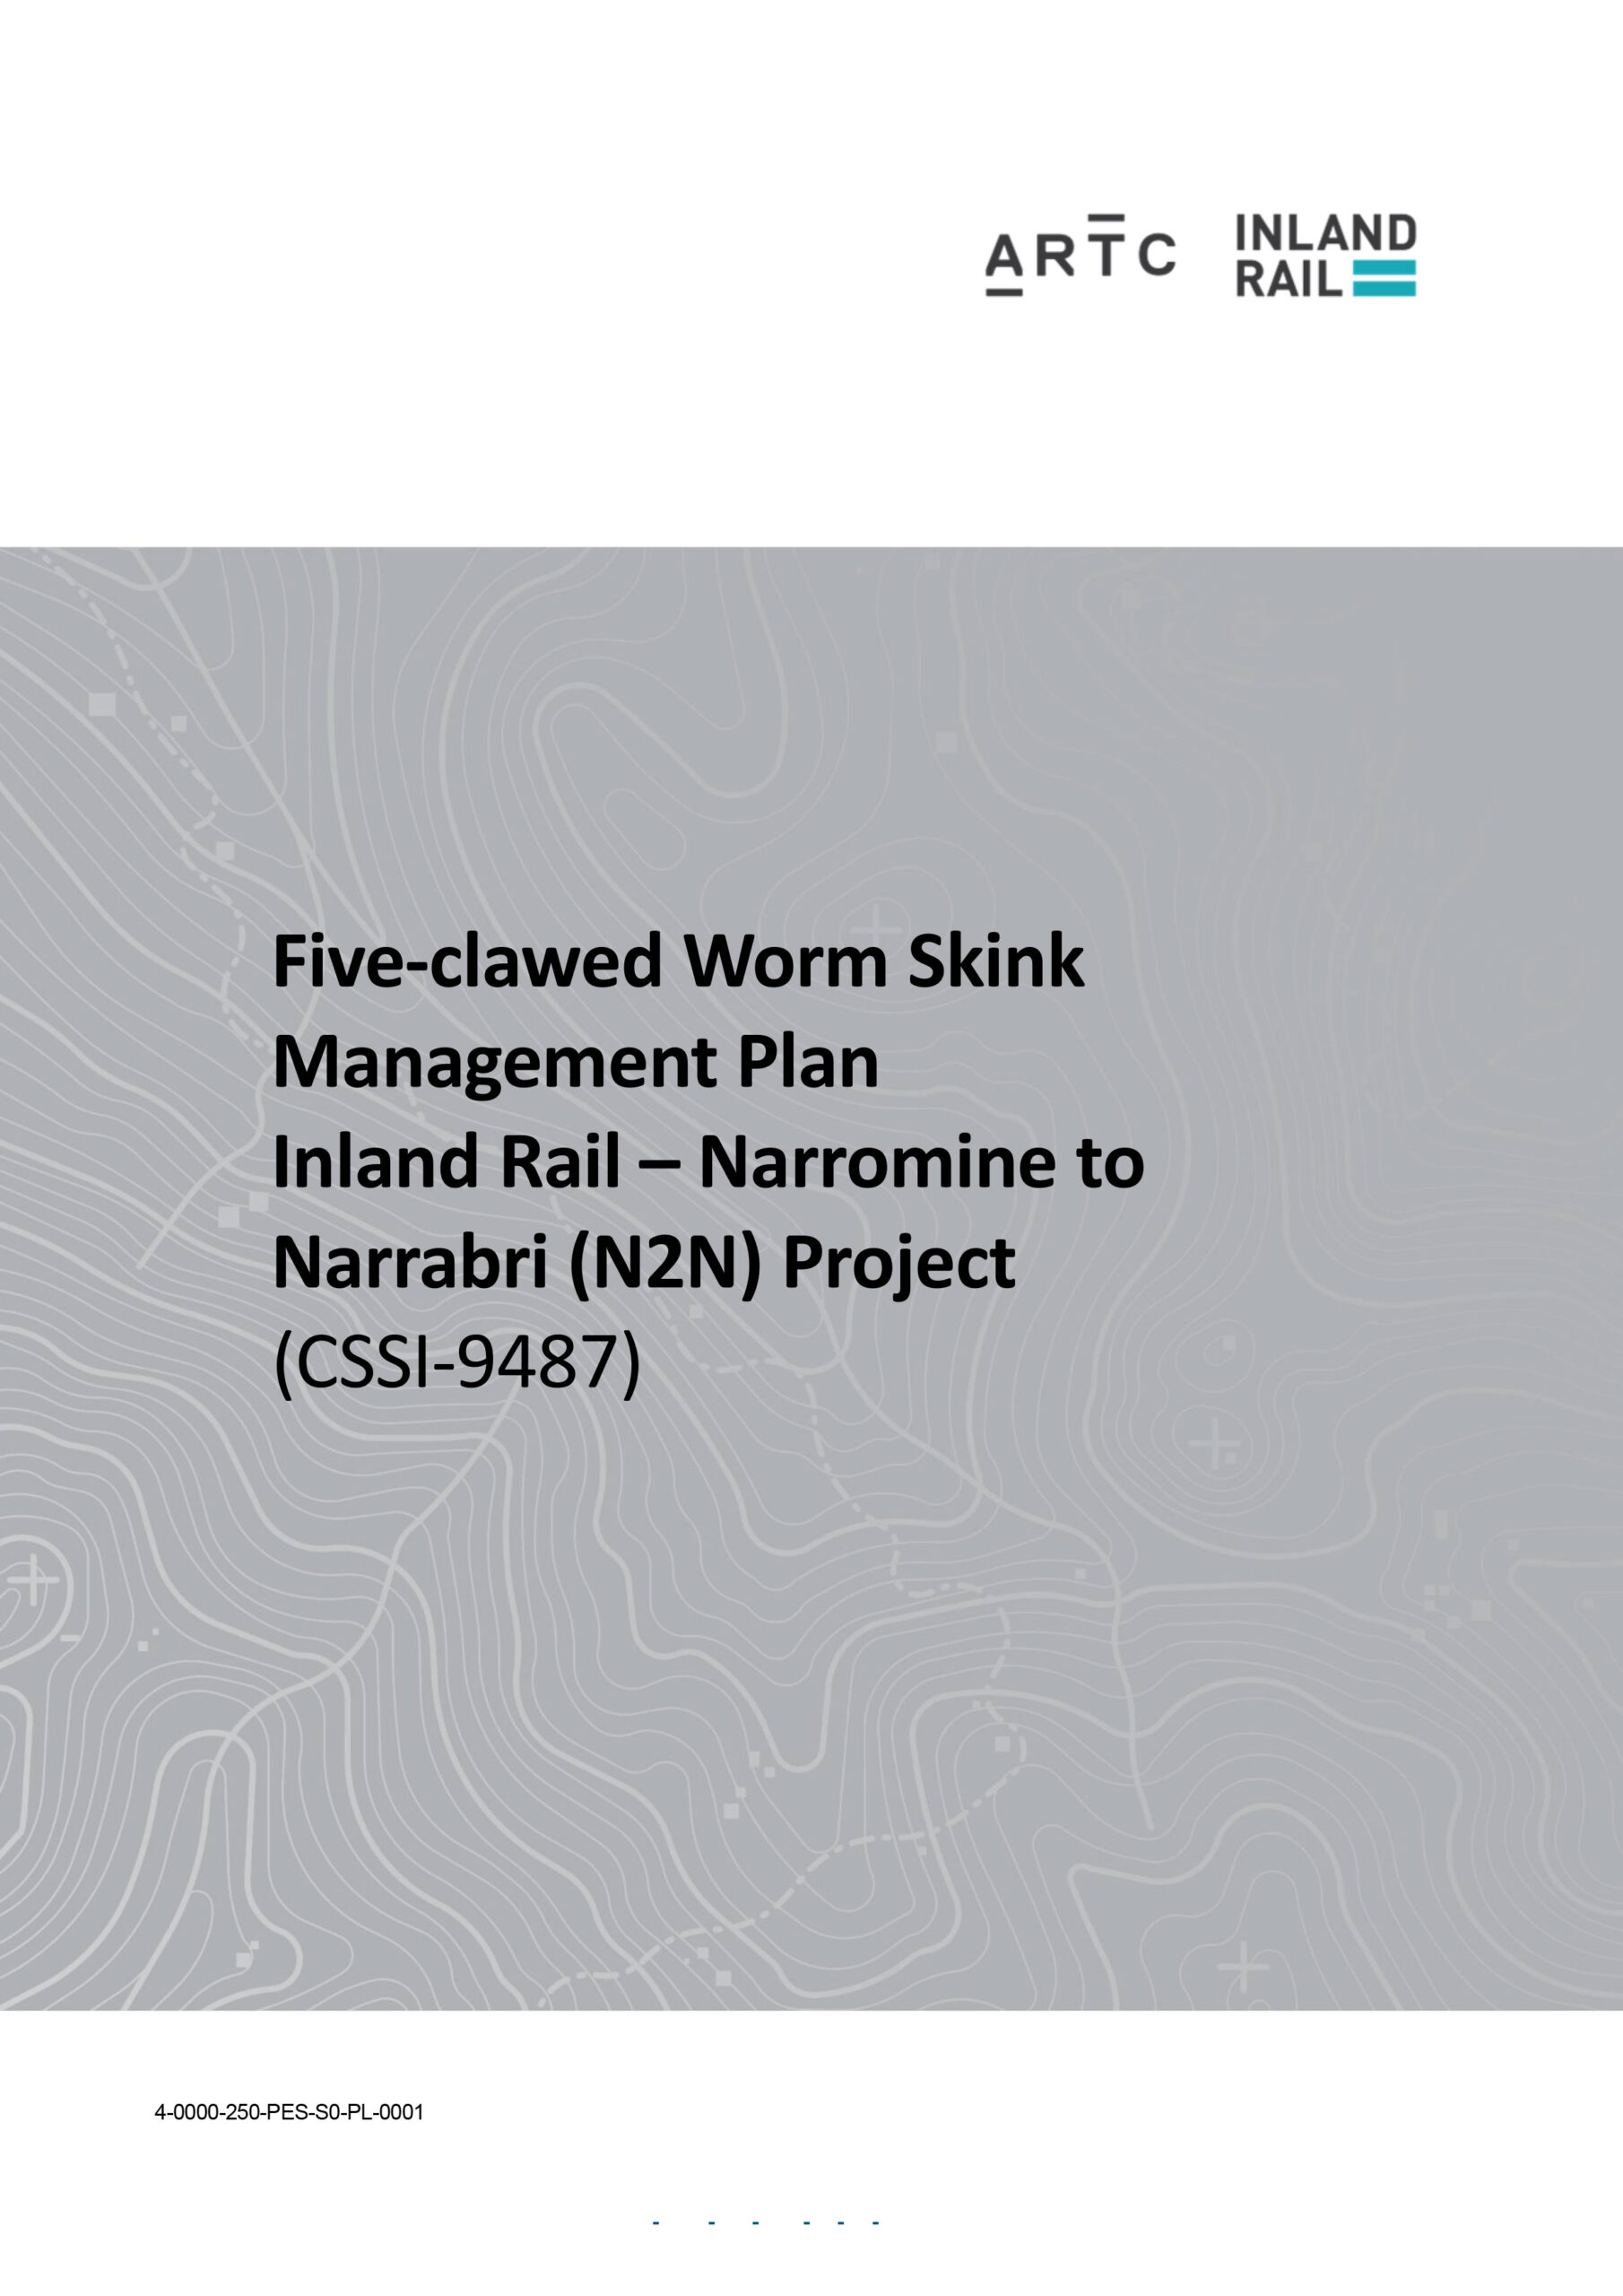 Image thumbnail for Five-clawed Worm Skink Management Plan